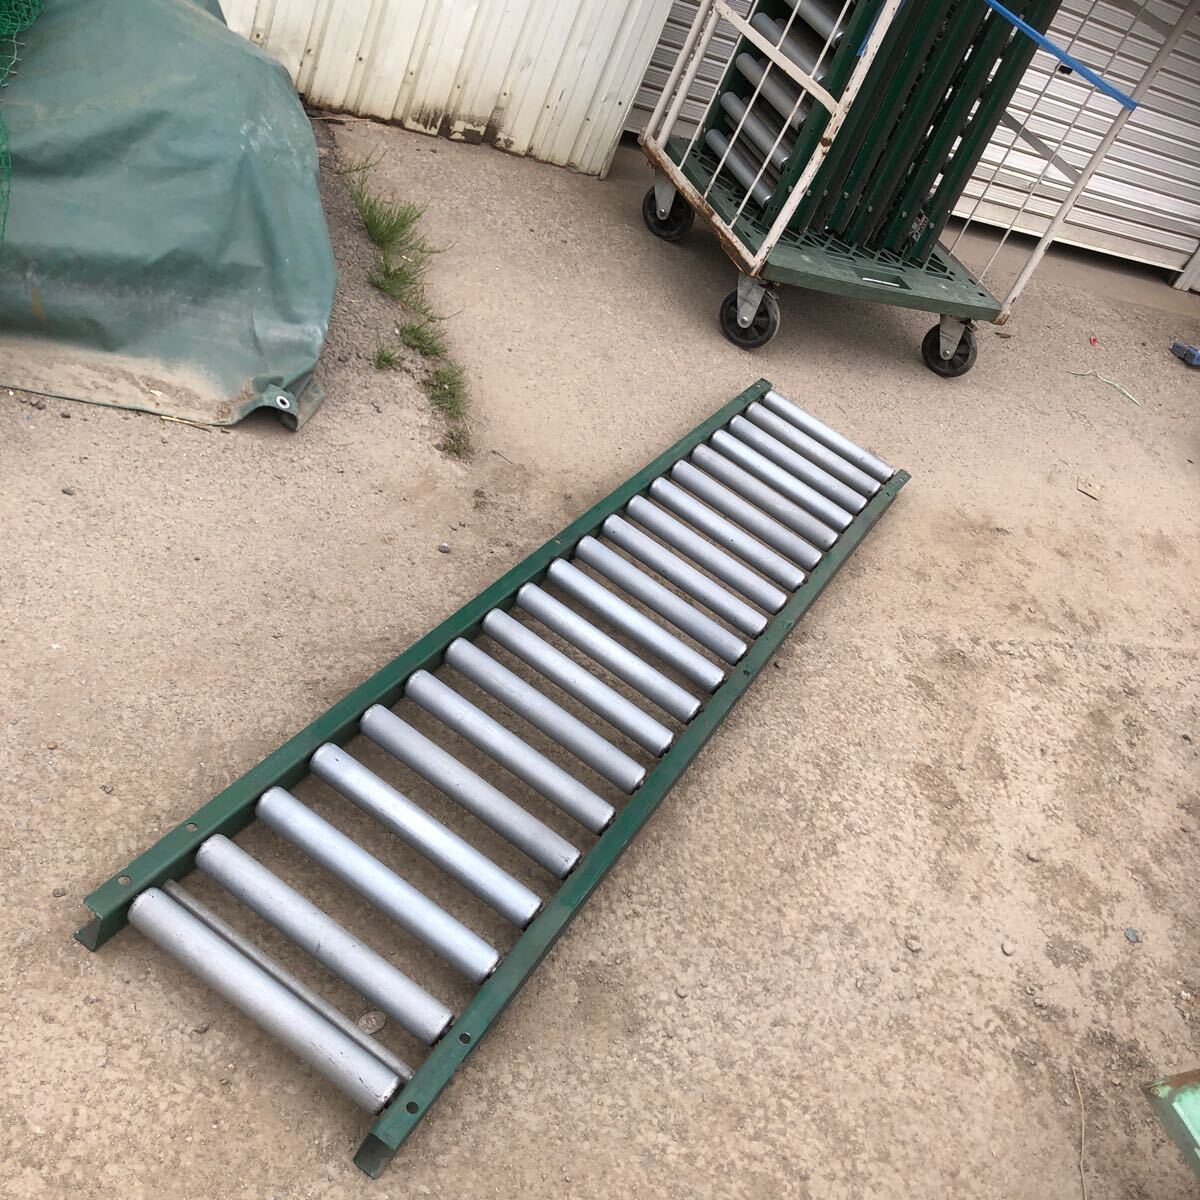  large amount! 9ps.@/ selection . place / central conveyor roller conveyor length approximately 2000mm × width approximately 400mm/ distribution * warehouse /2 meter roller conveyer 